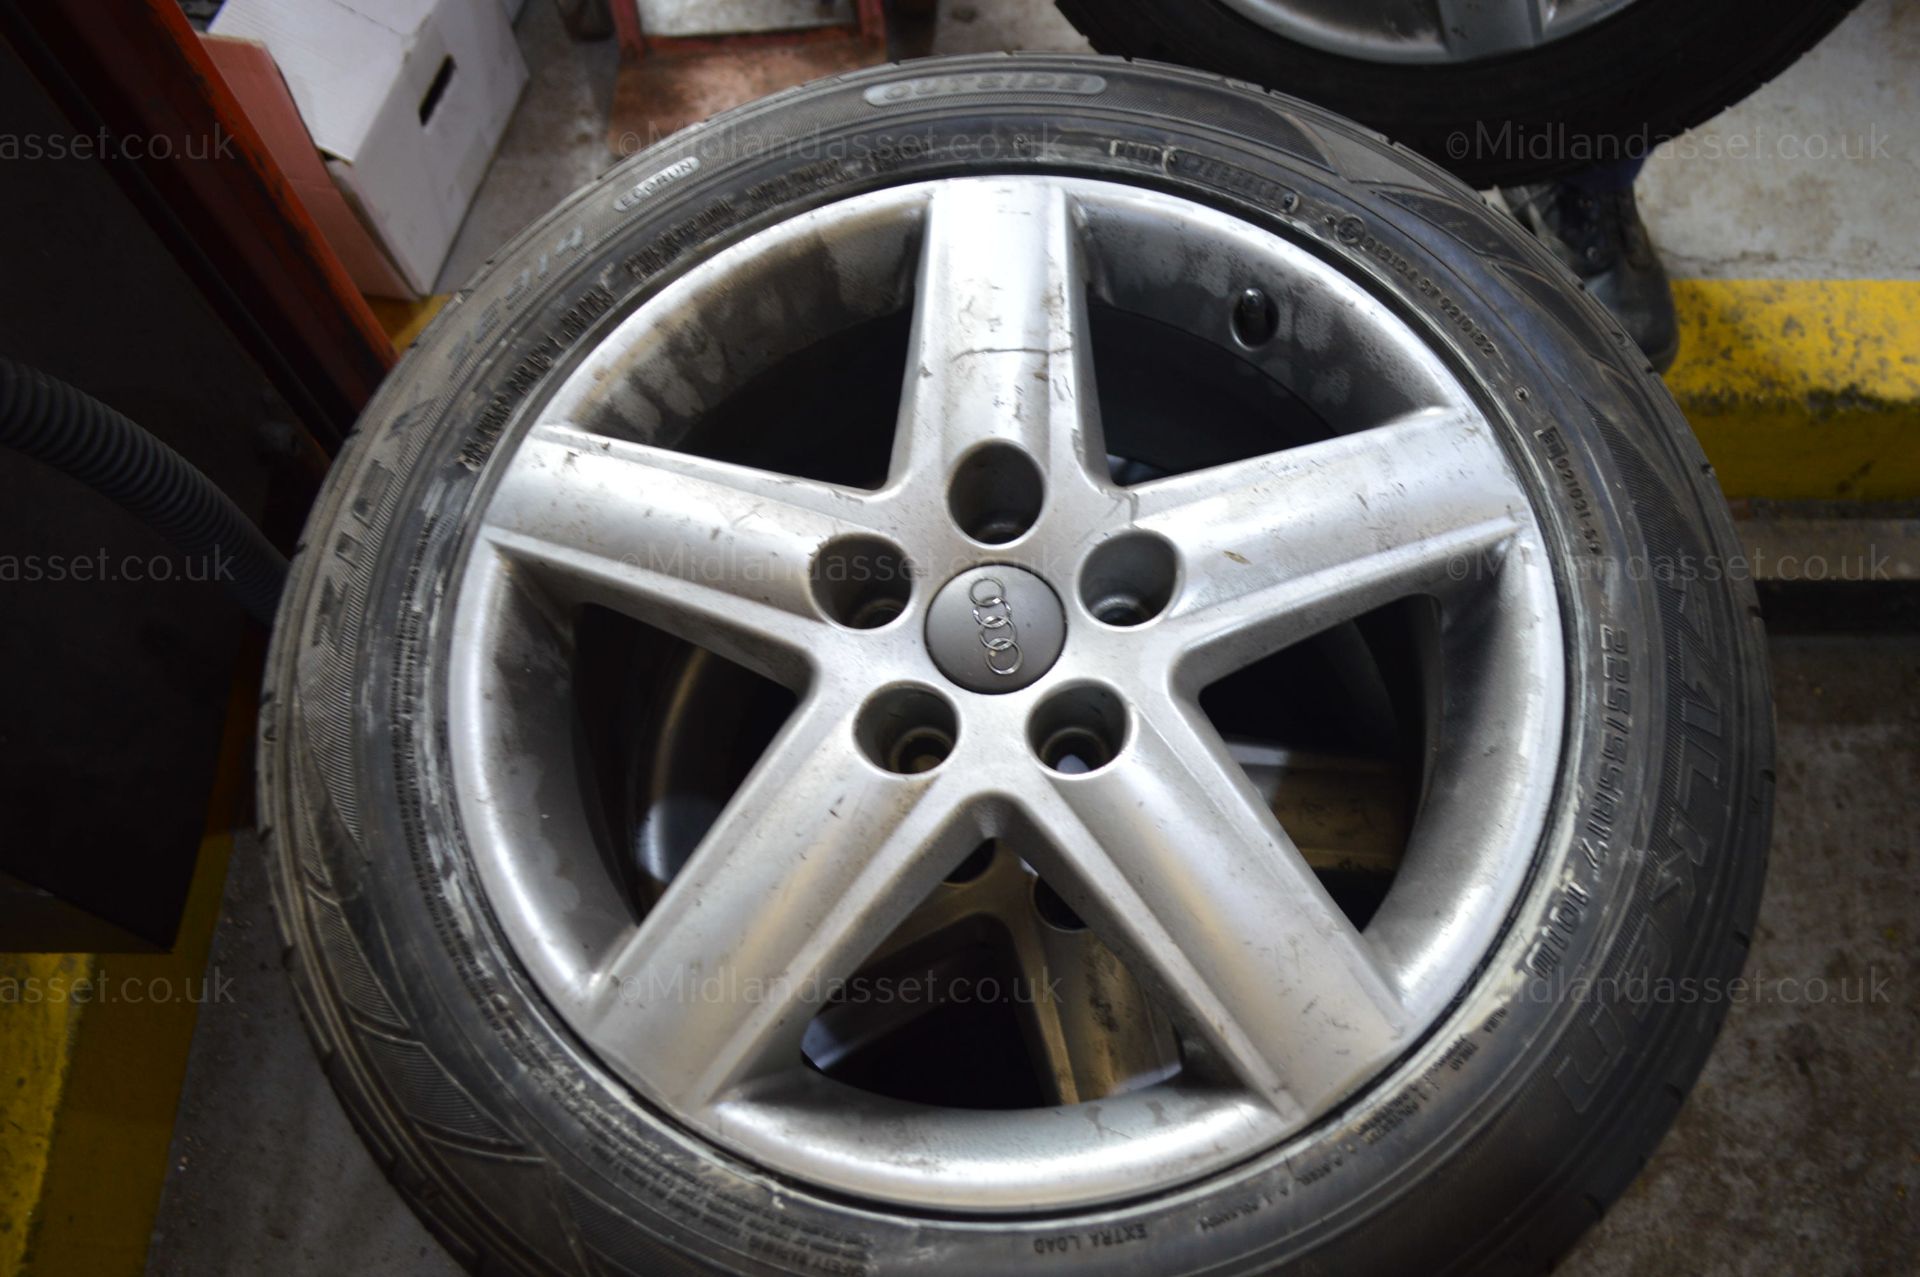 4 x 17"" AUDI ALLOY WHEELS AND TYRES *NO VAT* - Image 3 of 8